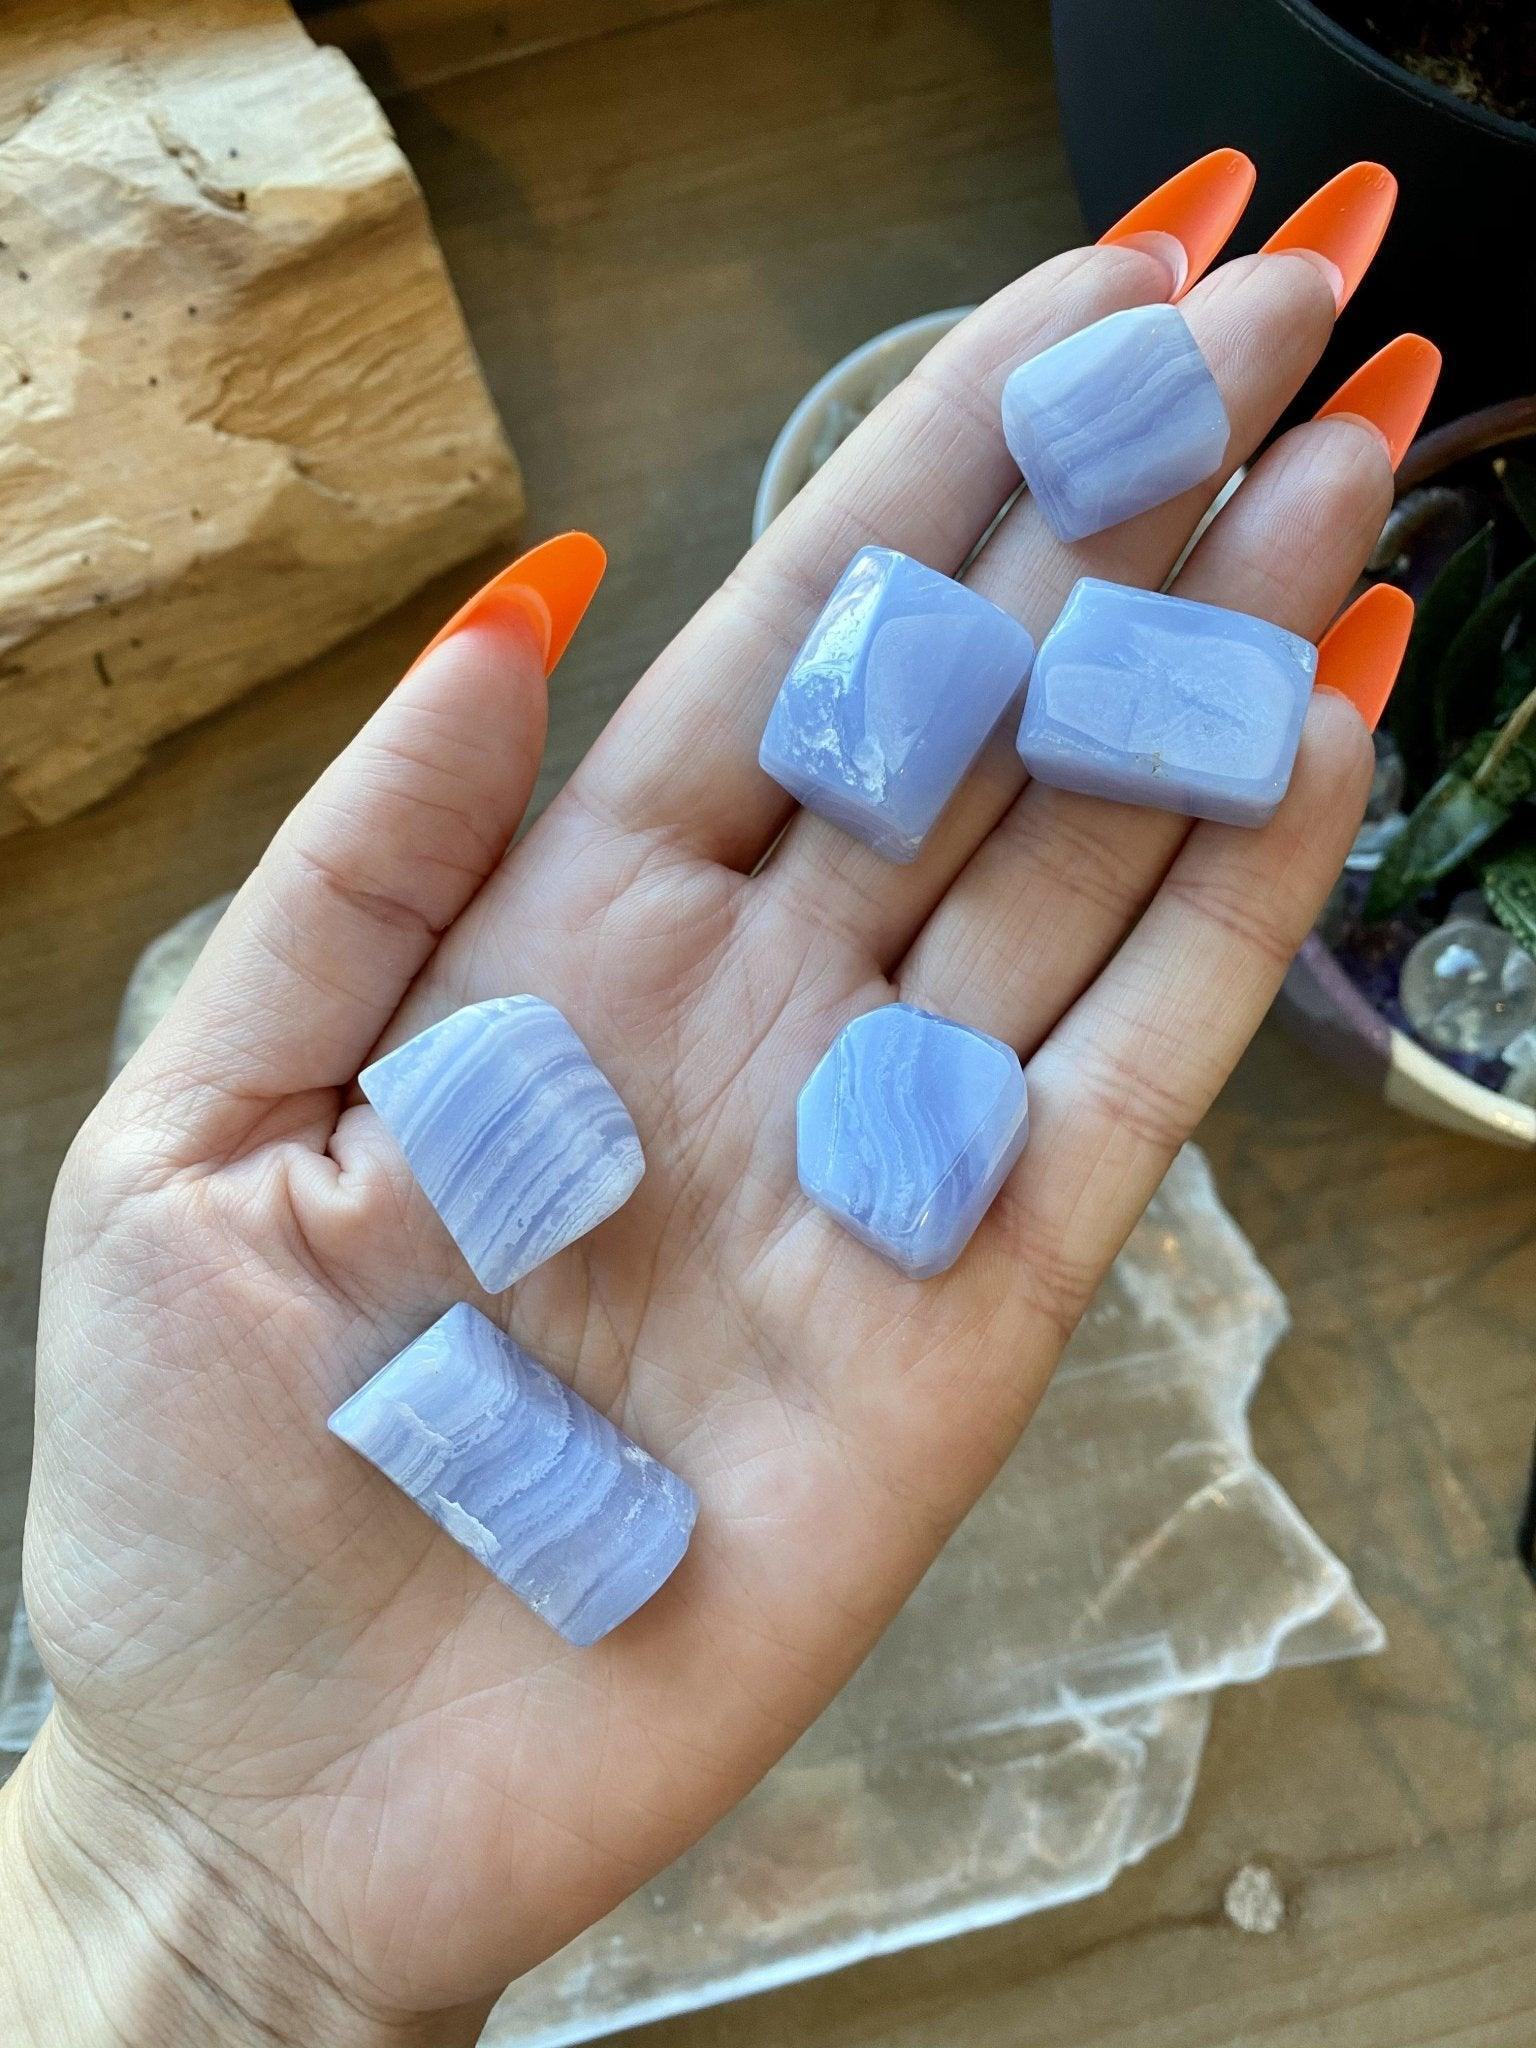 BLUE LACE AGATE CUBE - HIGH QUALITY - 33 bday, 444 sale, 7 sale, birthday, blue lace agate, bulk, calm gift bundle, cube, emotional support, end of year sale, flash sale, holiday sale, new year sale, old, pocket crystal, pocket stone, tumble - The Mineral Maven